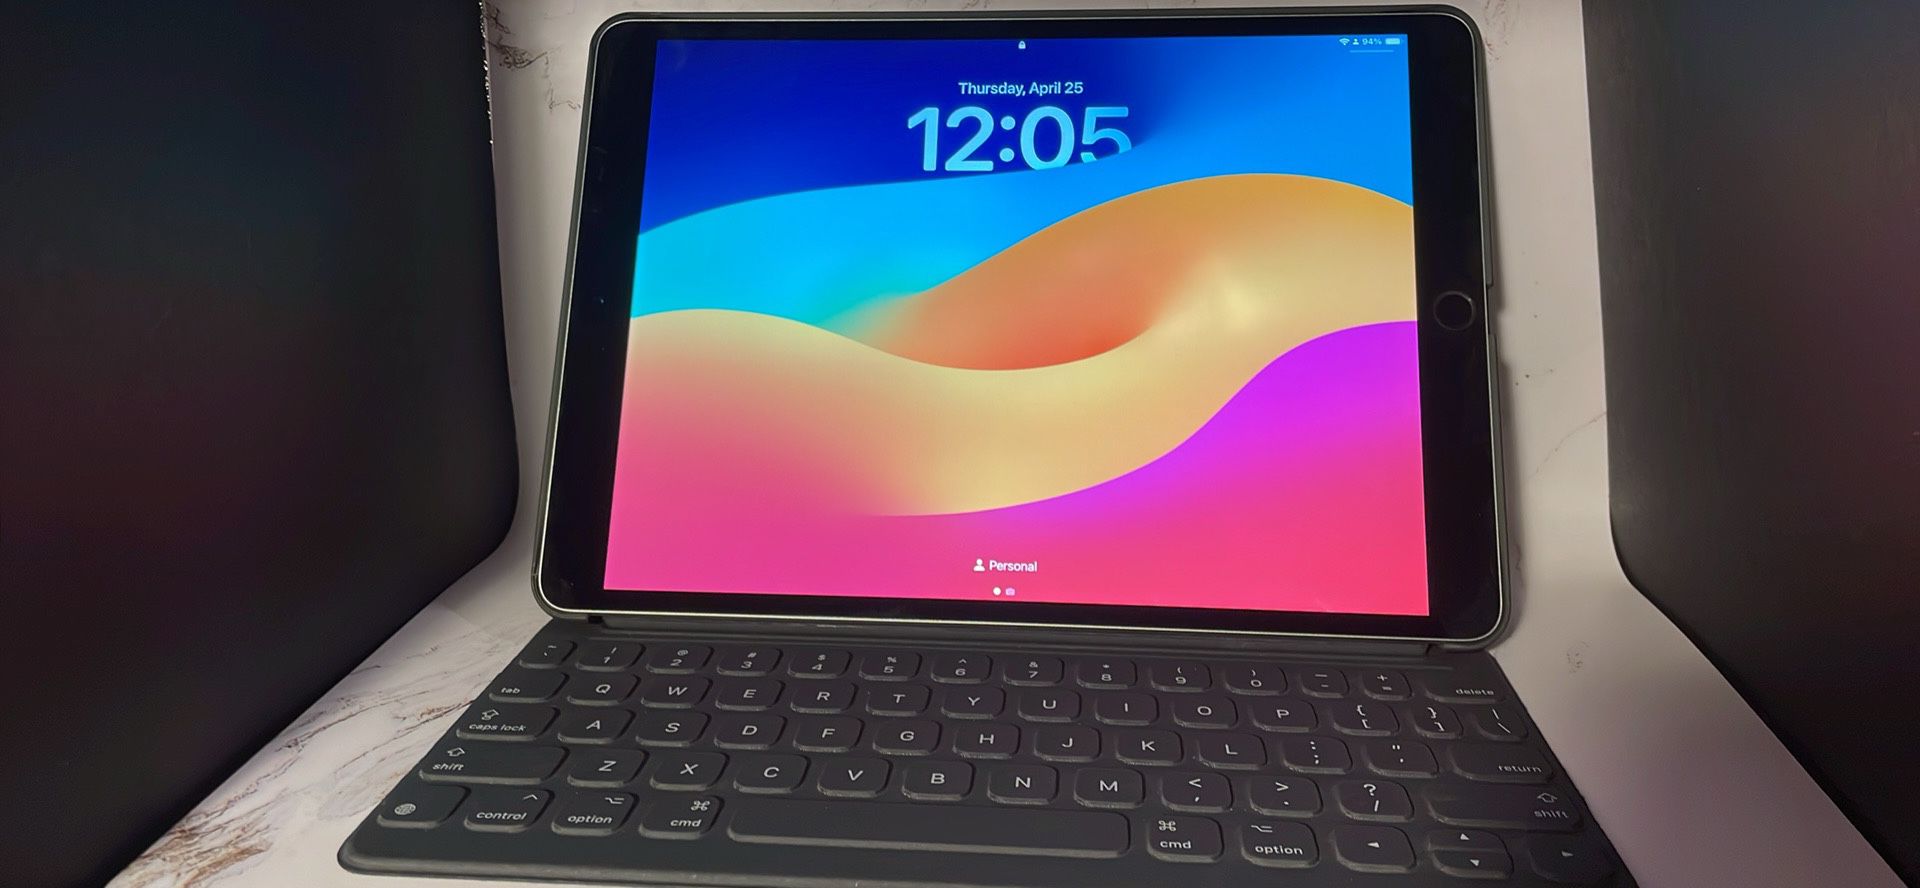 iPad Pro With Smart Keyboard and Case